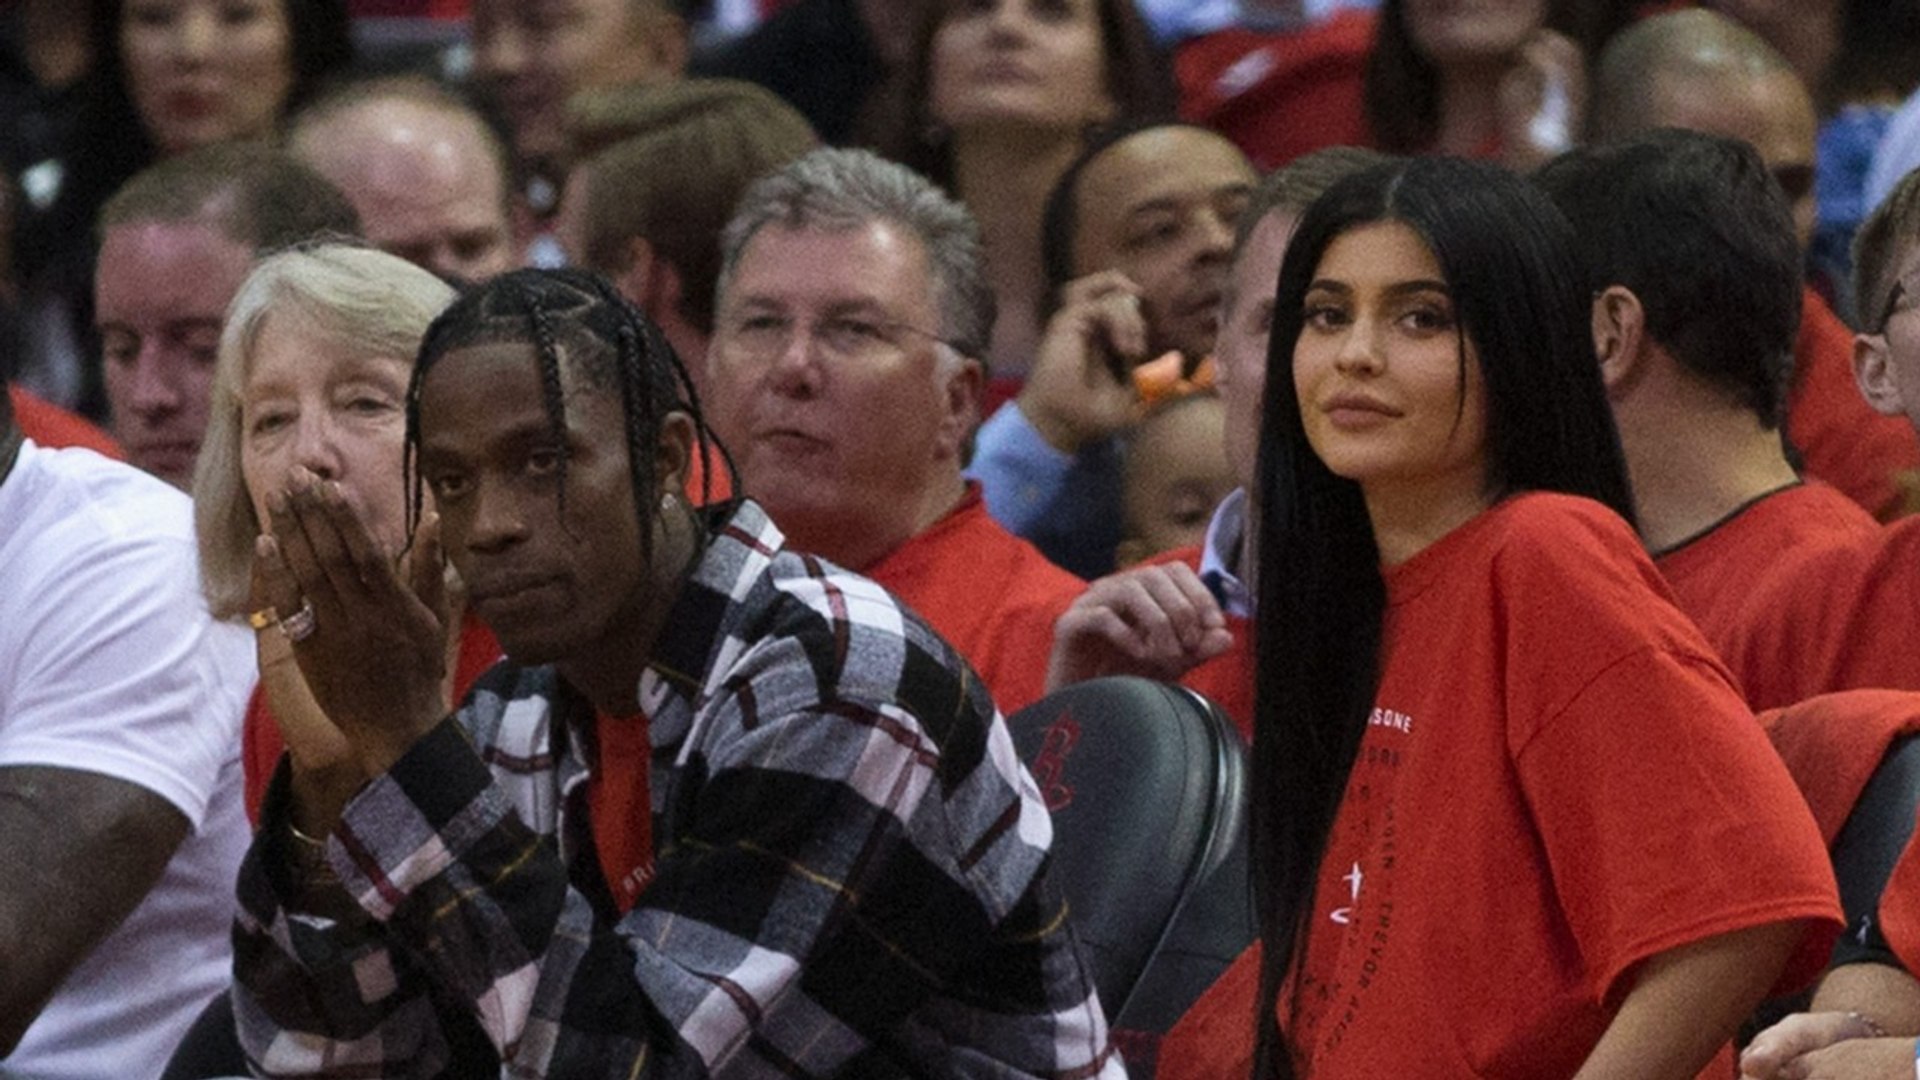 Kylie Jenner and Travis Scott Spotted at NBA Playoff Game